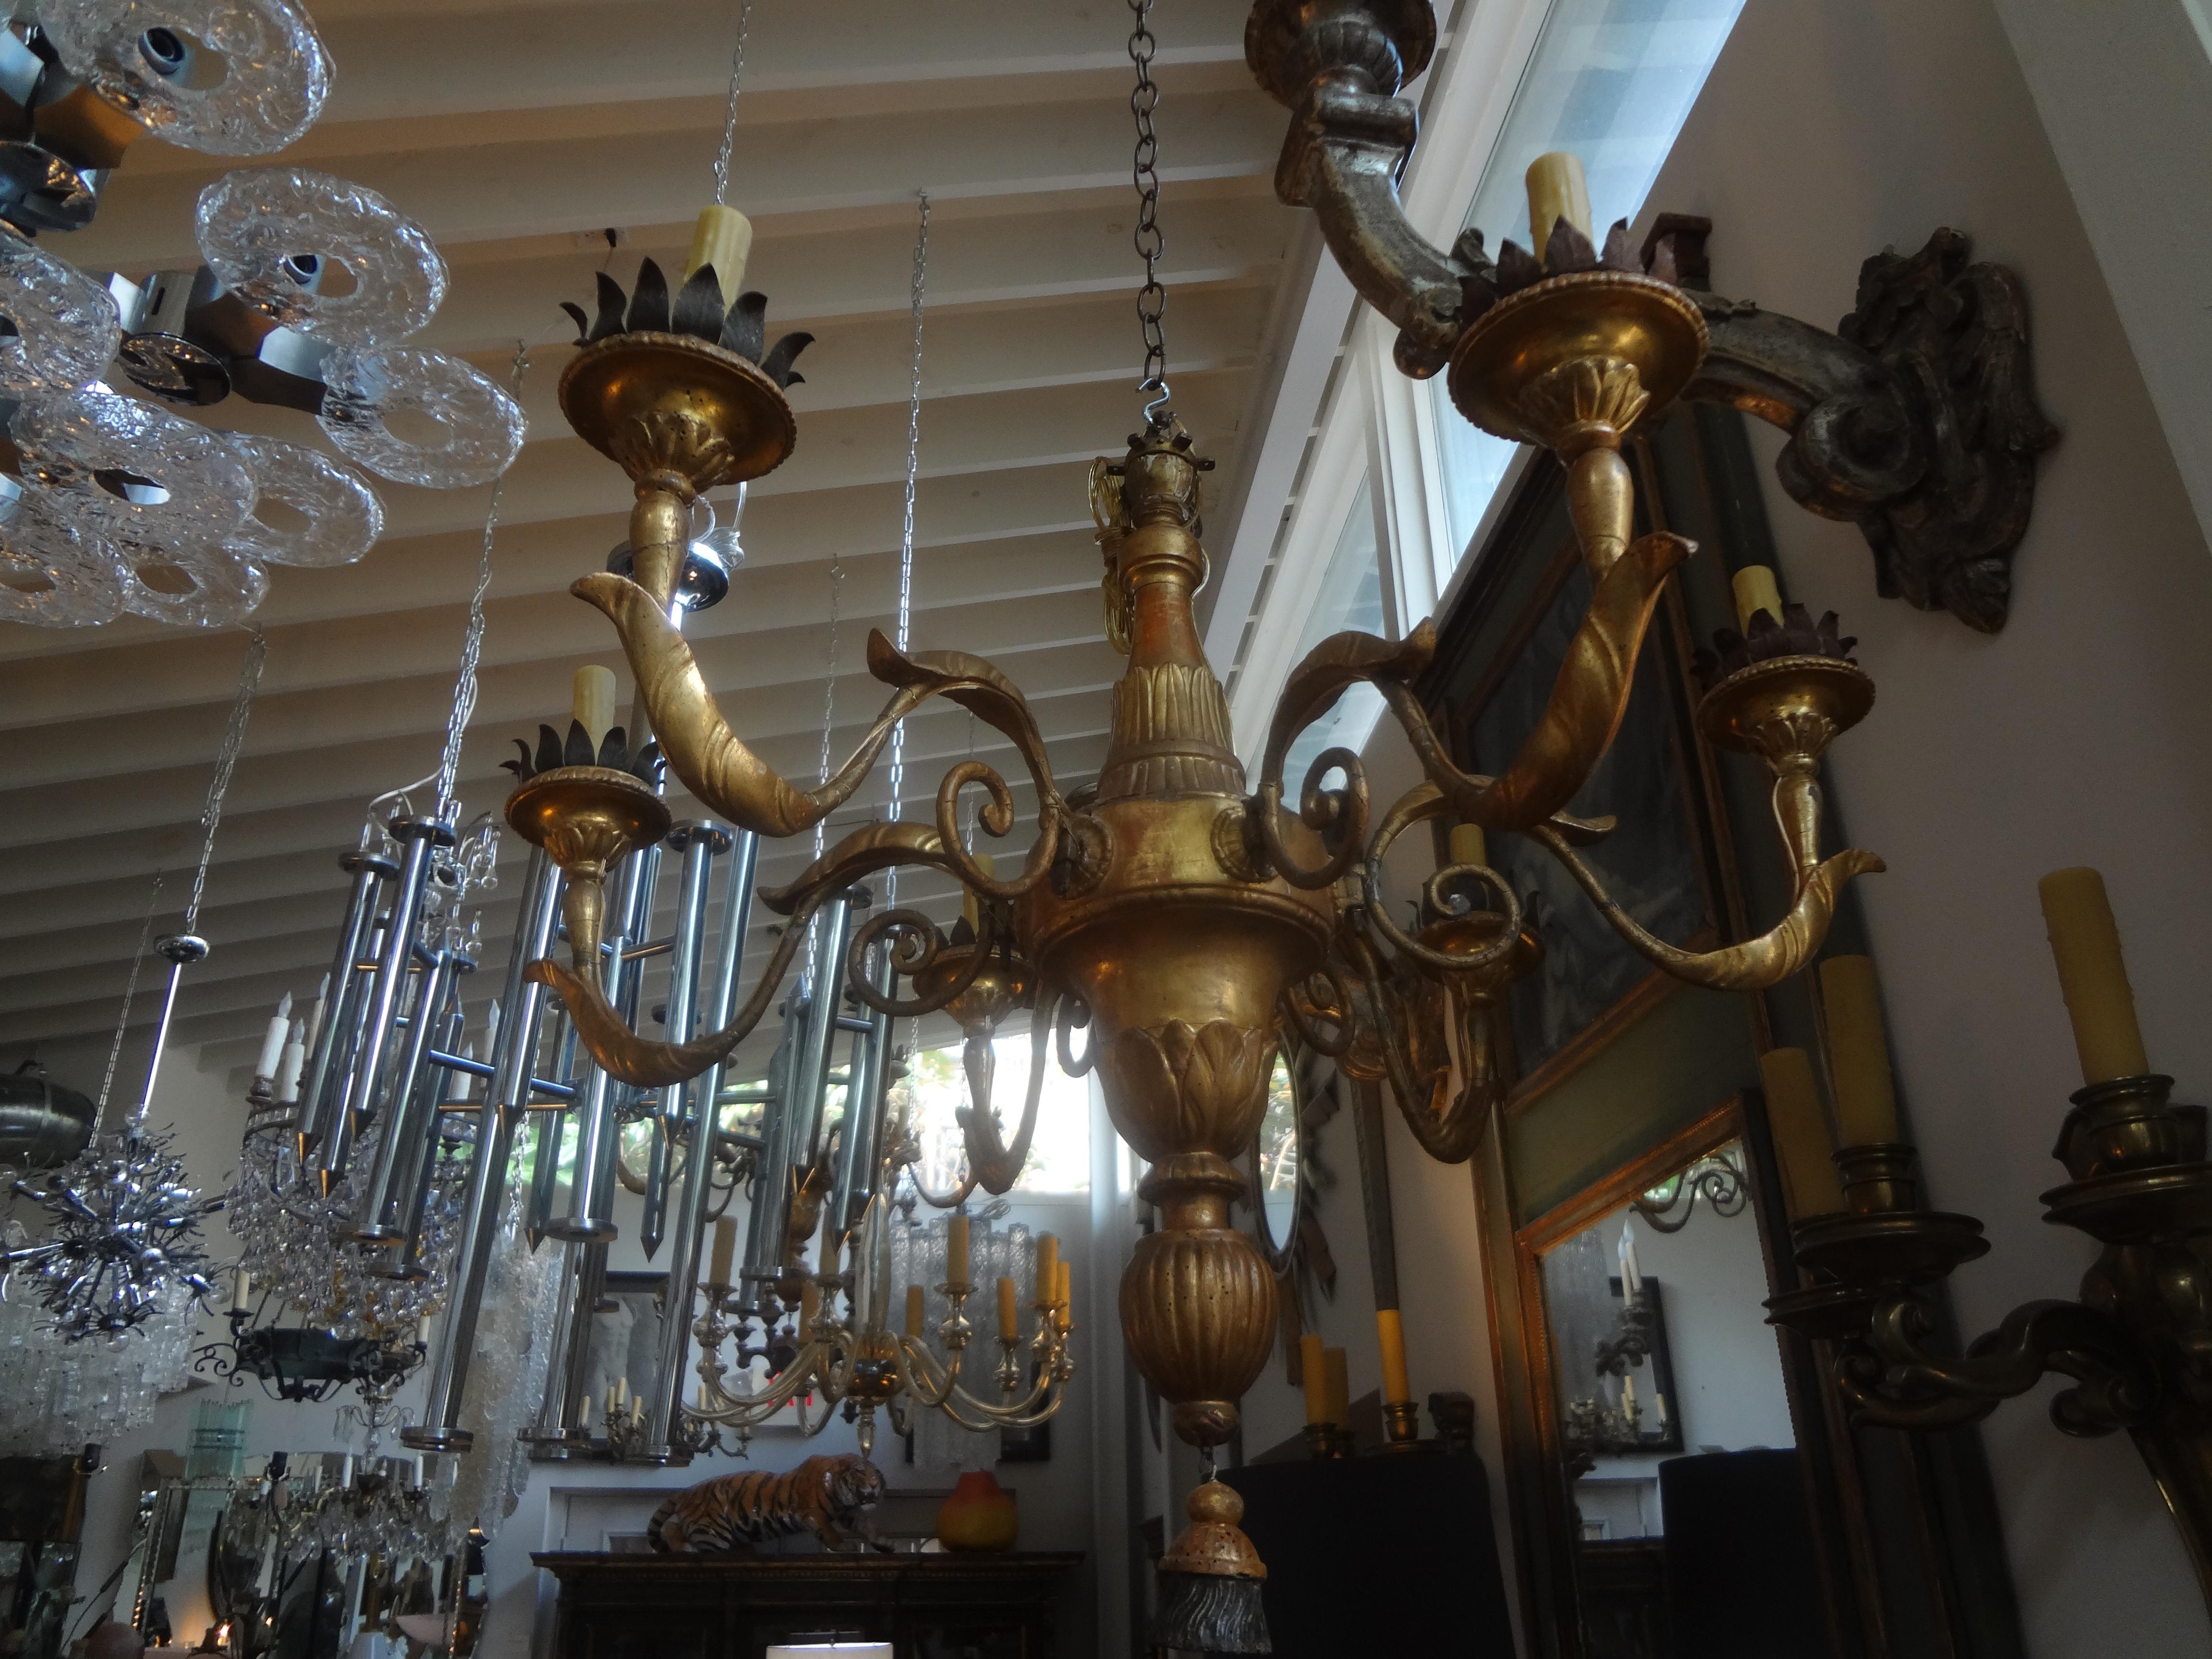 Rare find!!!
Magnificent pair of 18th century Italian giltwood chandeliers from Tuscany. These fabulous 18th century Tuscan Louis XVI six arm giltwood chandeliers have been newly wired with new sockets for the American market.
Height can be